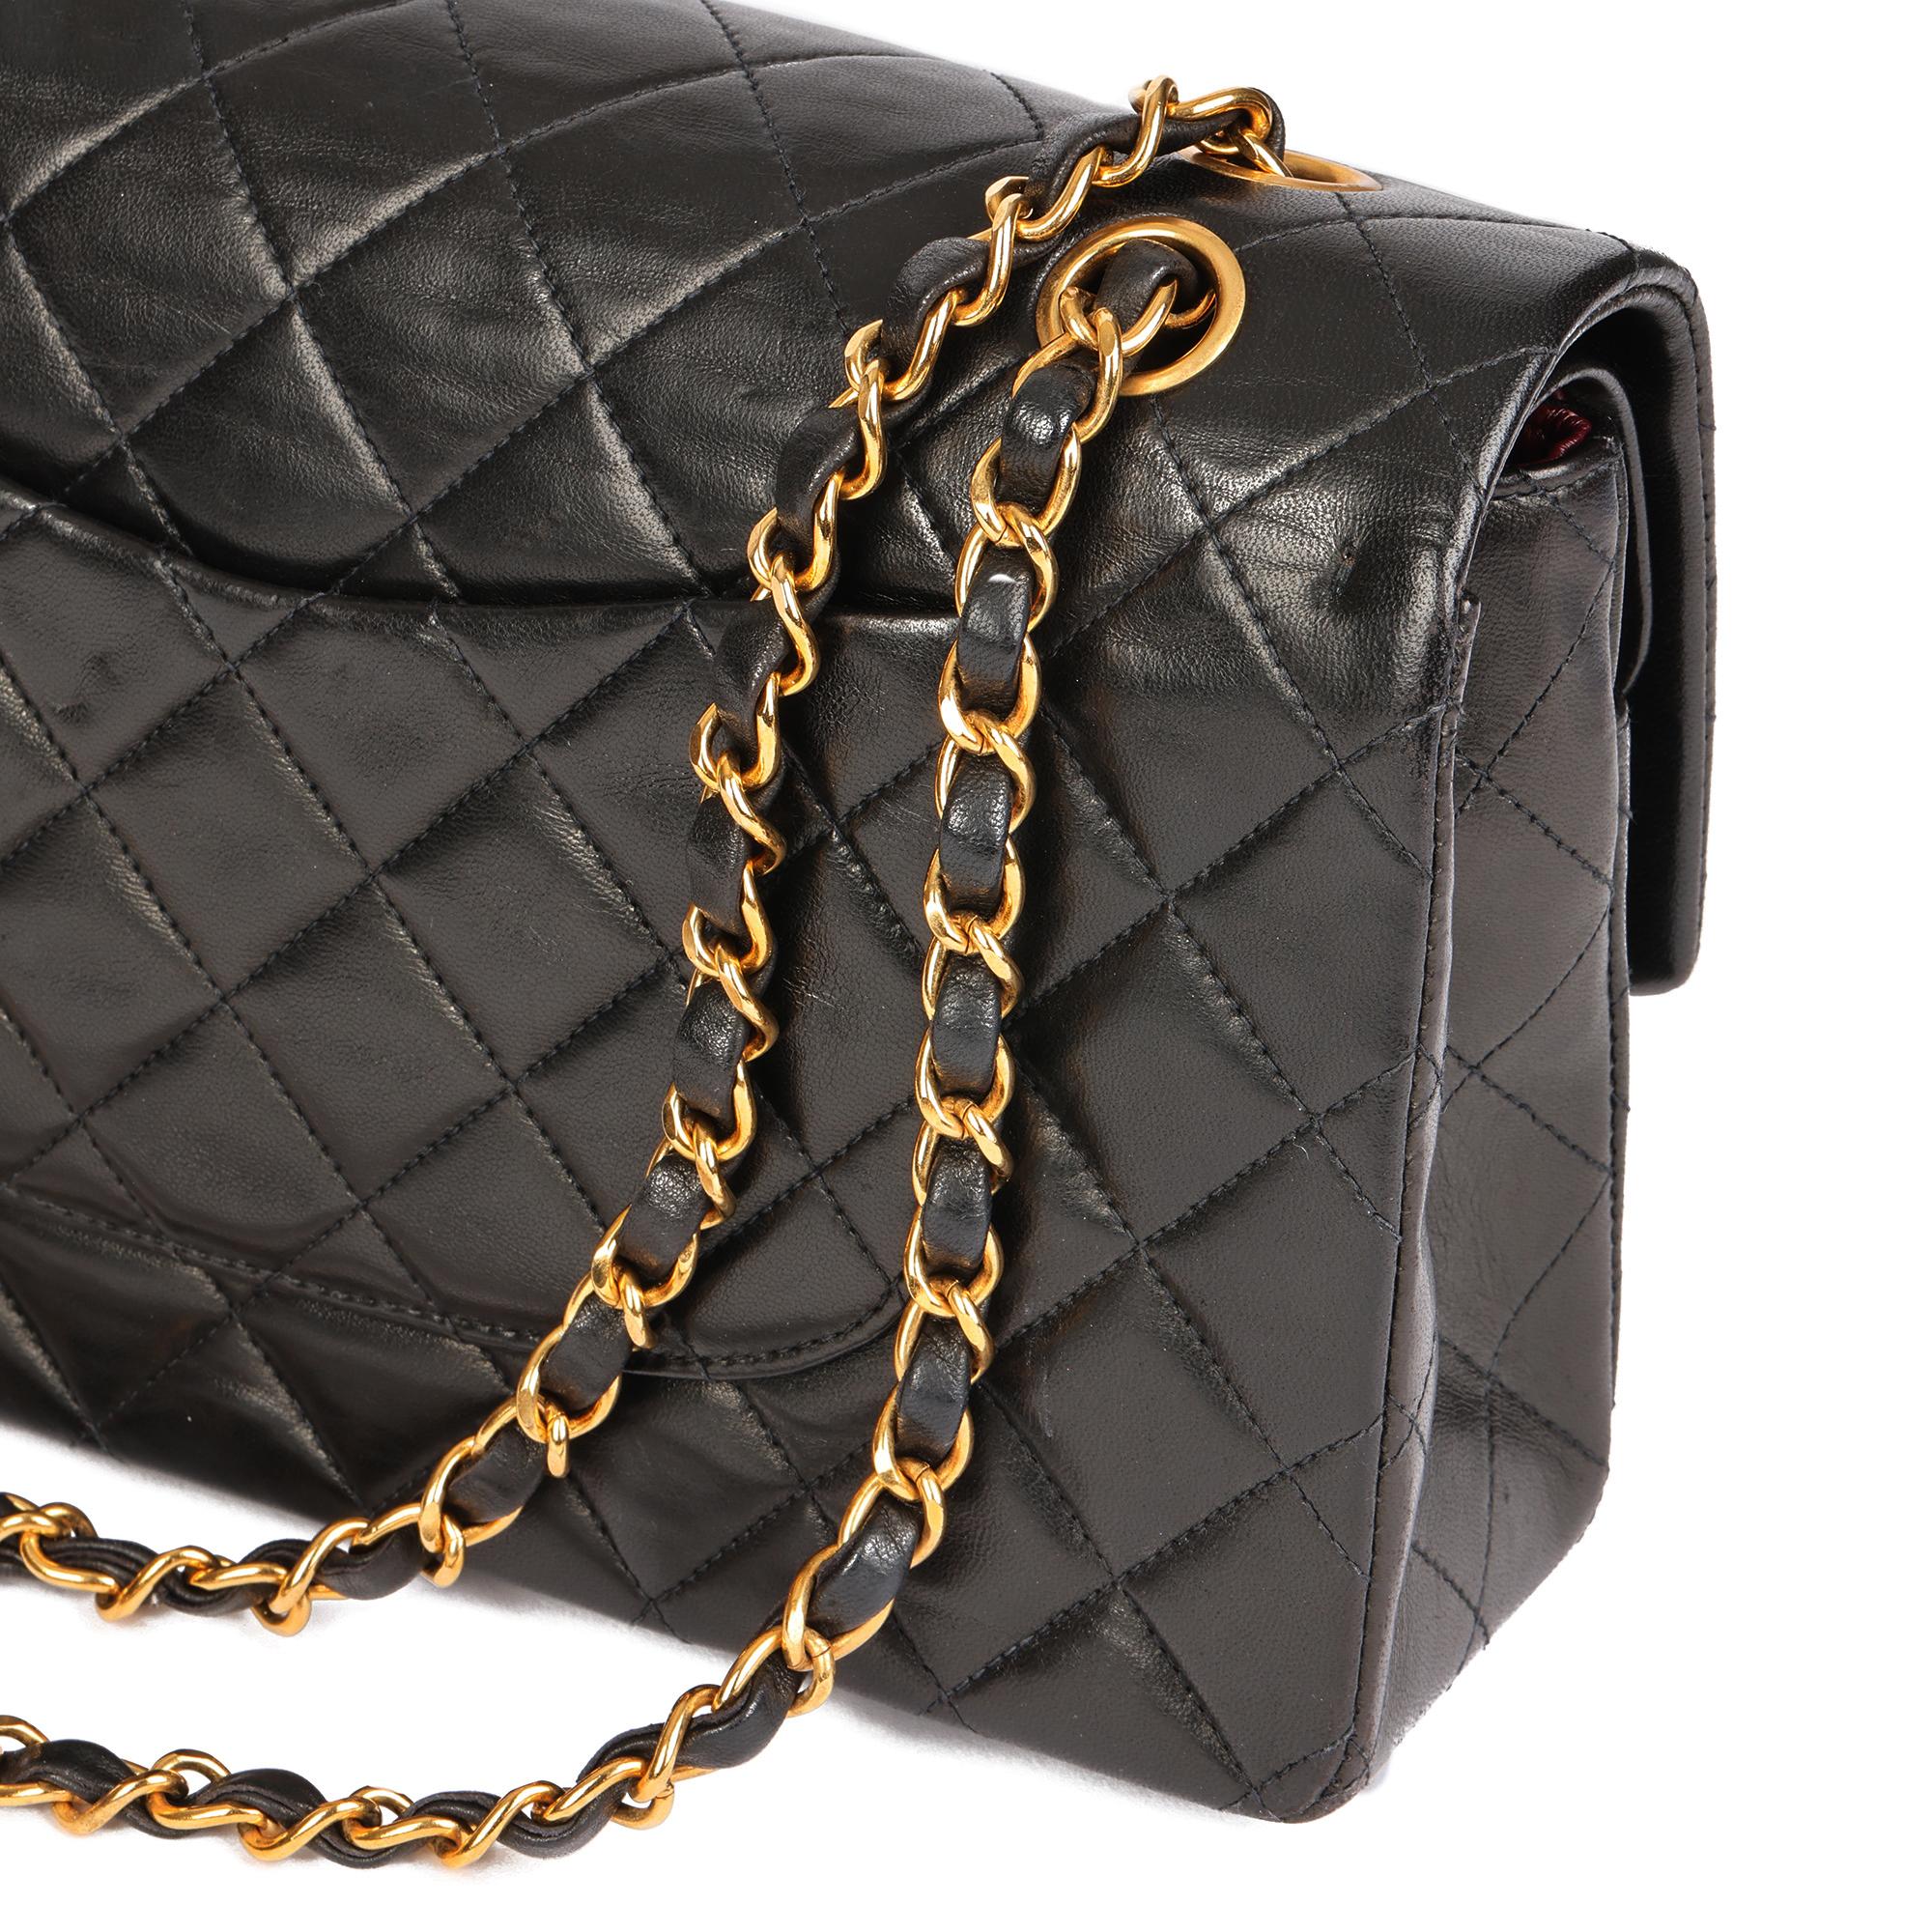 CHANEL Black Quilted Lambskin Vintage Medium Classic Double Flap Bag  4